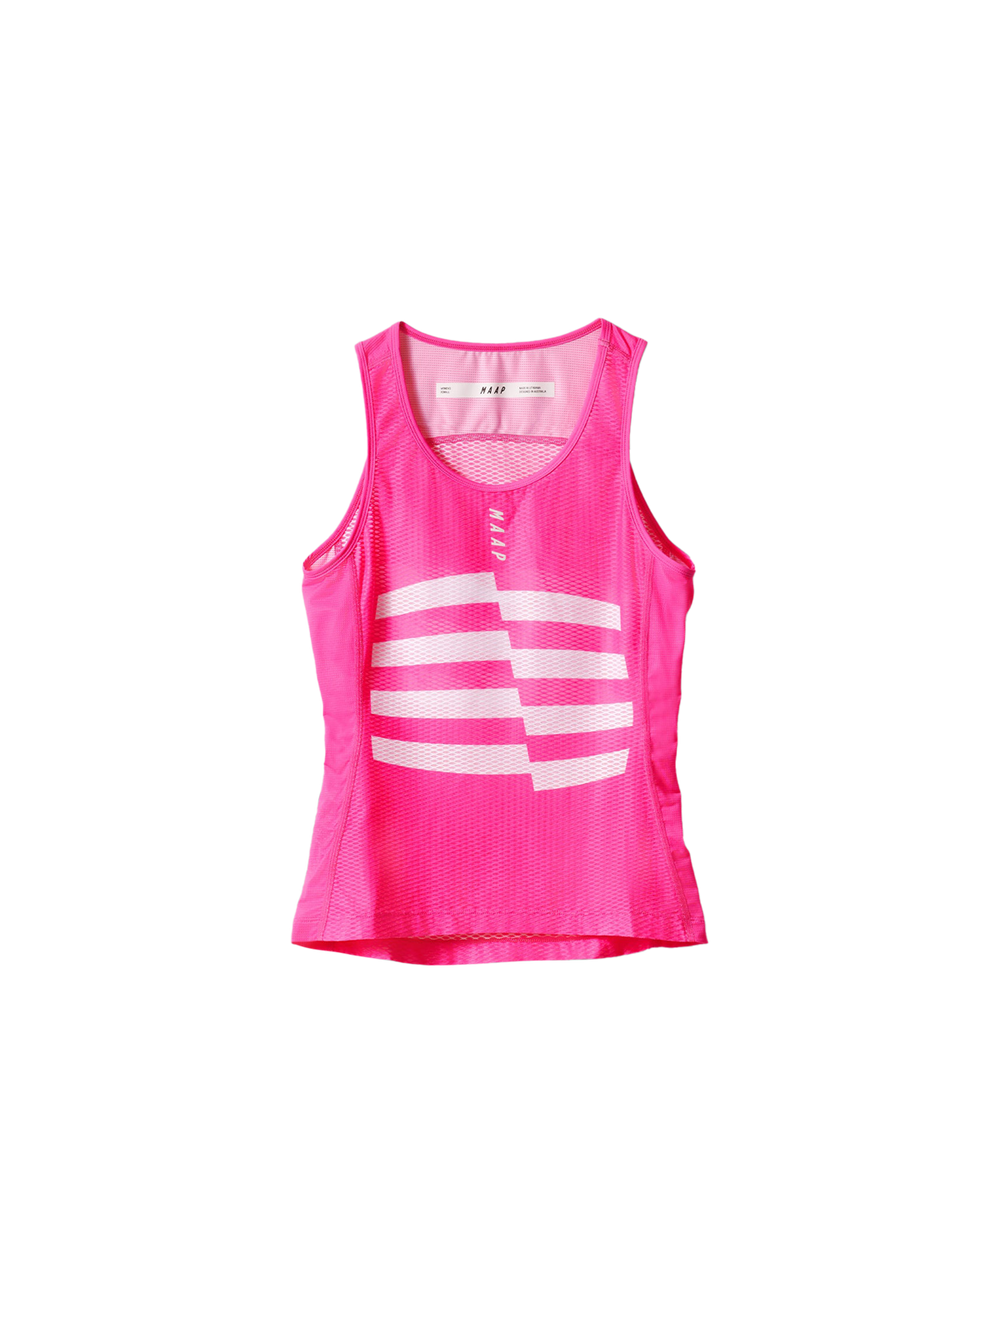 Product Image for Women's Sphere Team Base Layer